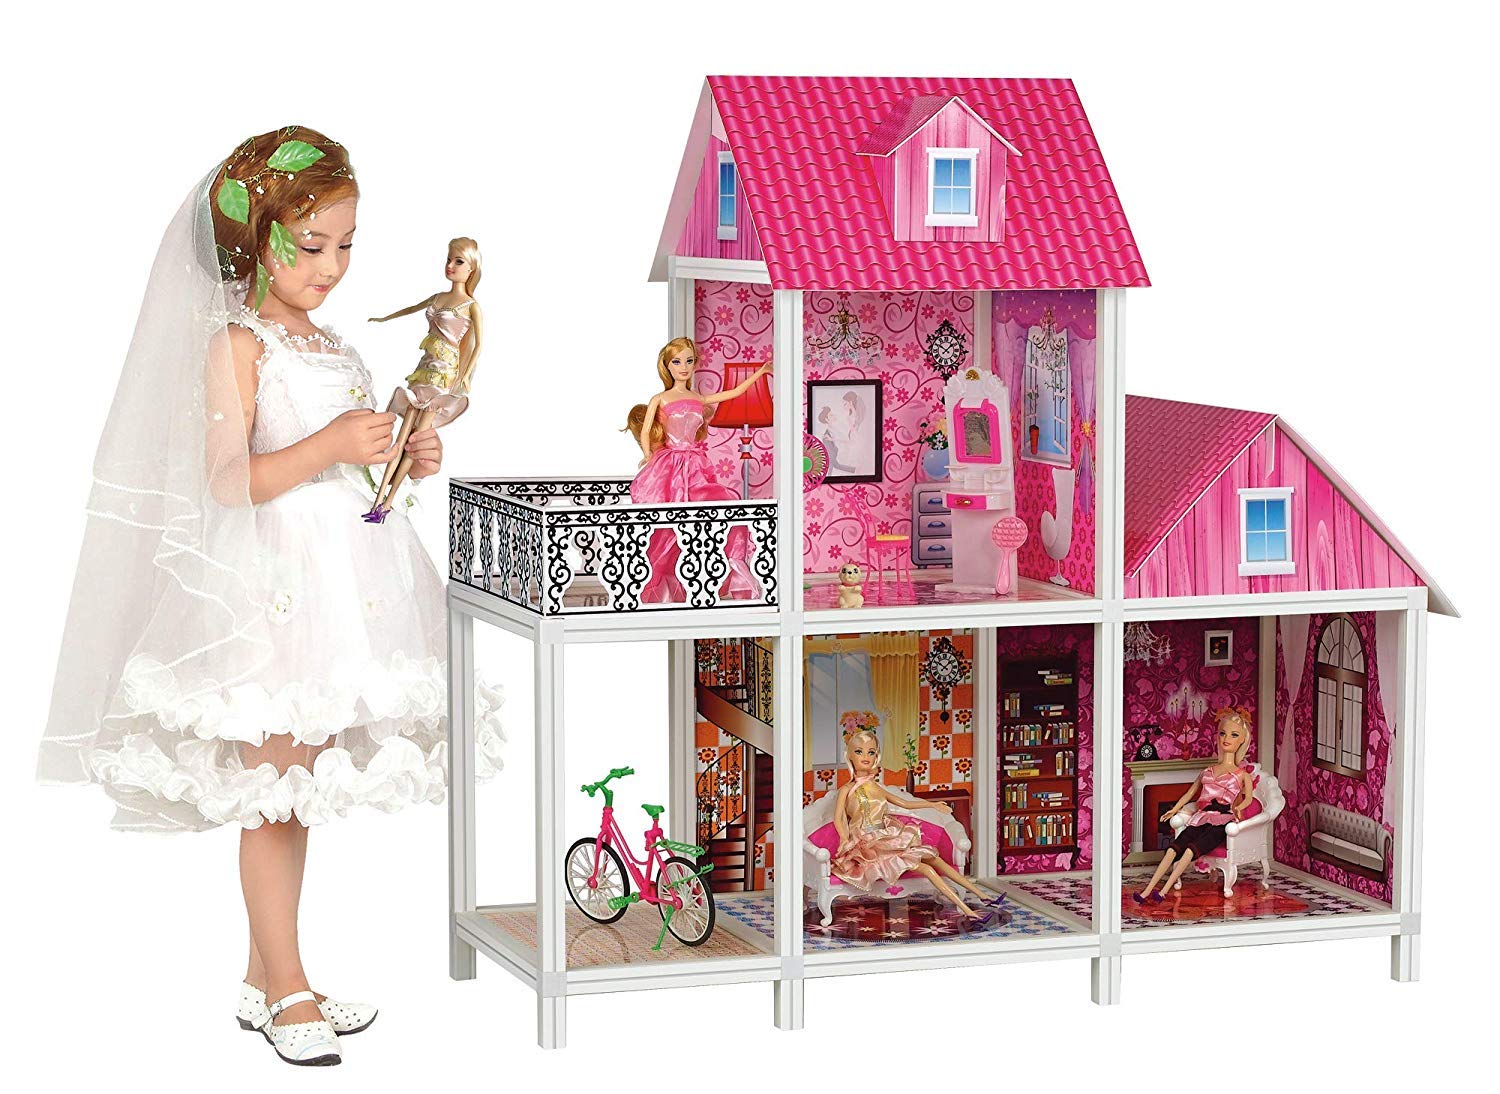 39'' Large Plastic & Hard Cardboard Dollhouse, Big Dreamhouse with Doll House Furniture, House Hold Items, Pretend Play Toys Gifts for Girls Kids Ages 3+, 4 Rooms